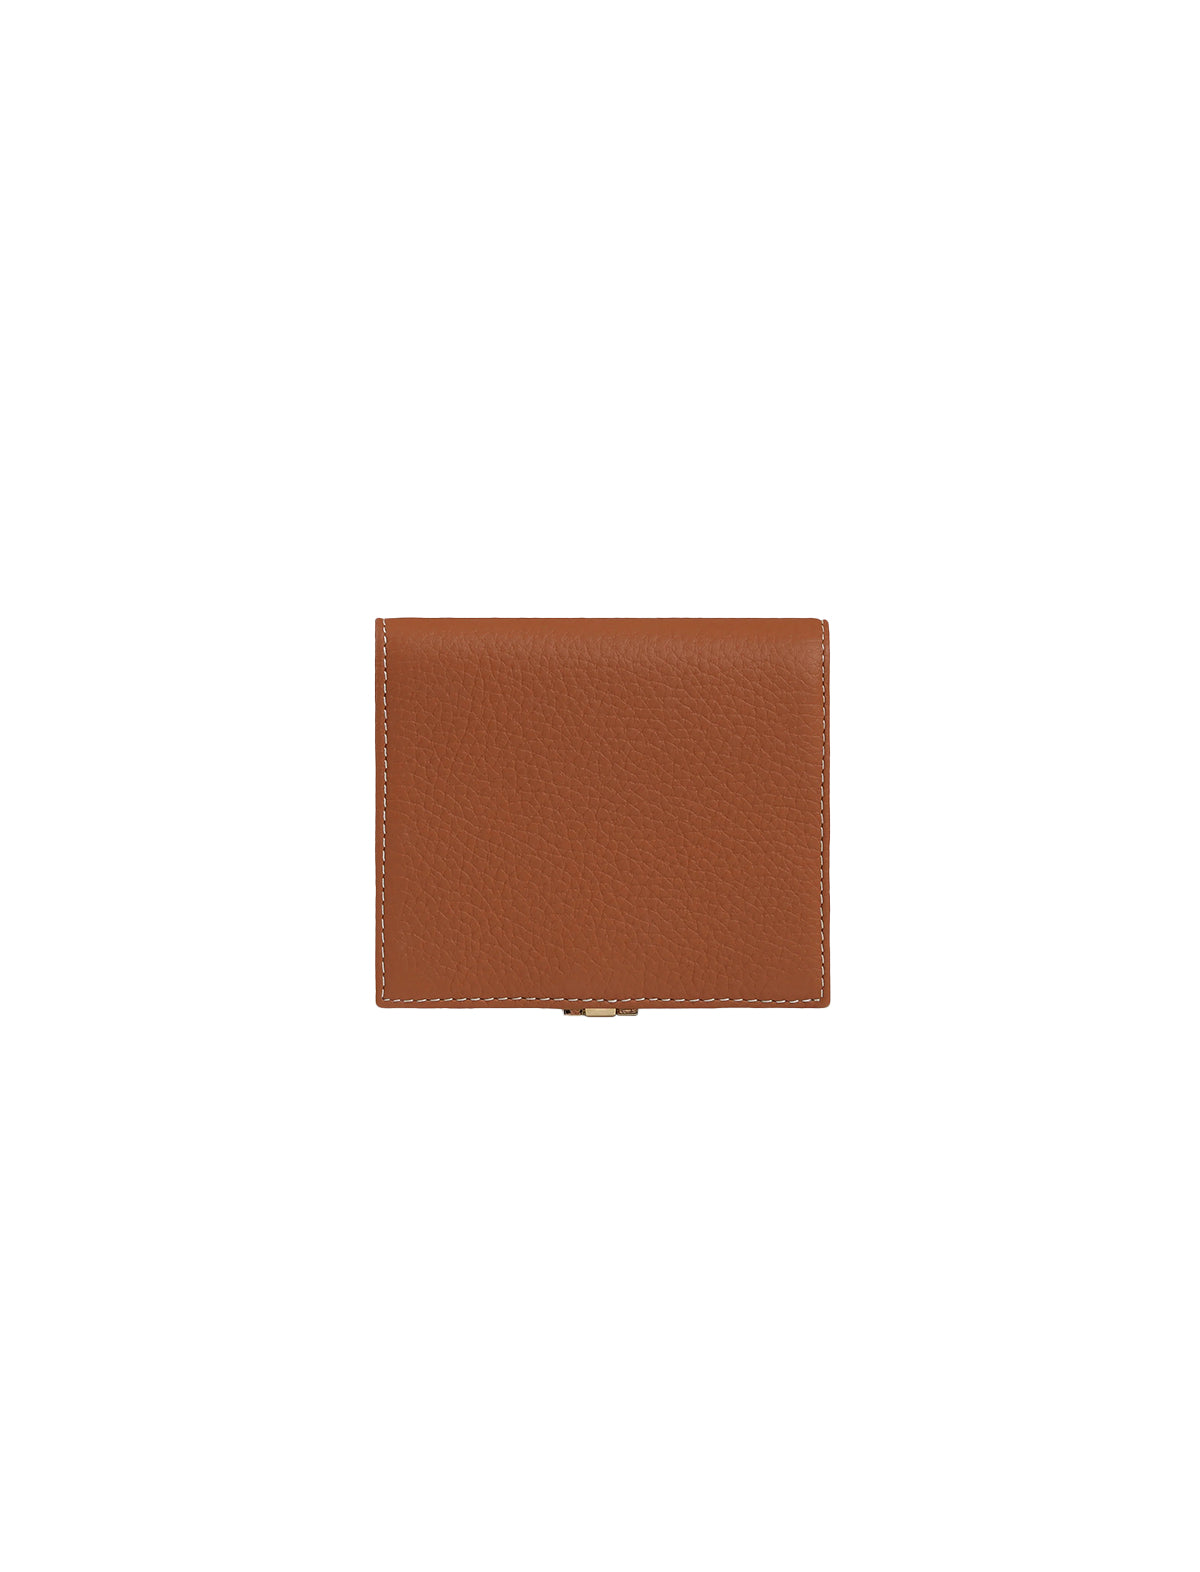 STRATHBERRY Crescent Wallet in Grain Leather Tan